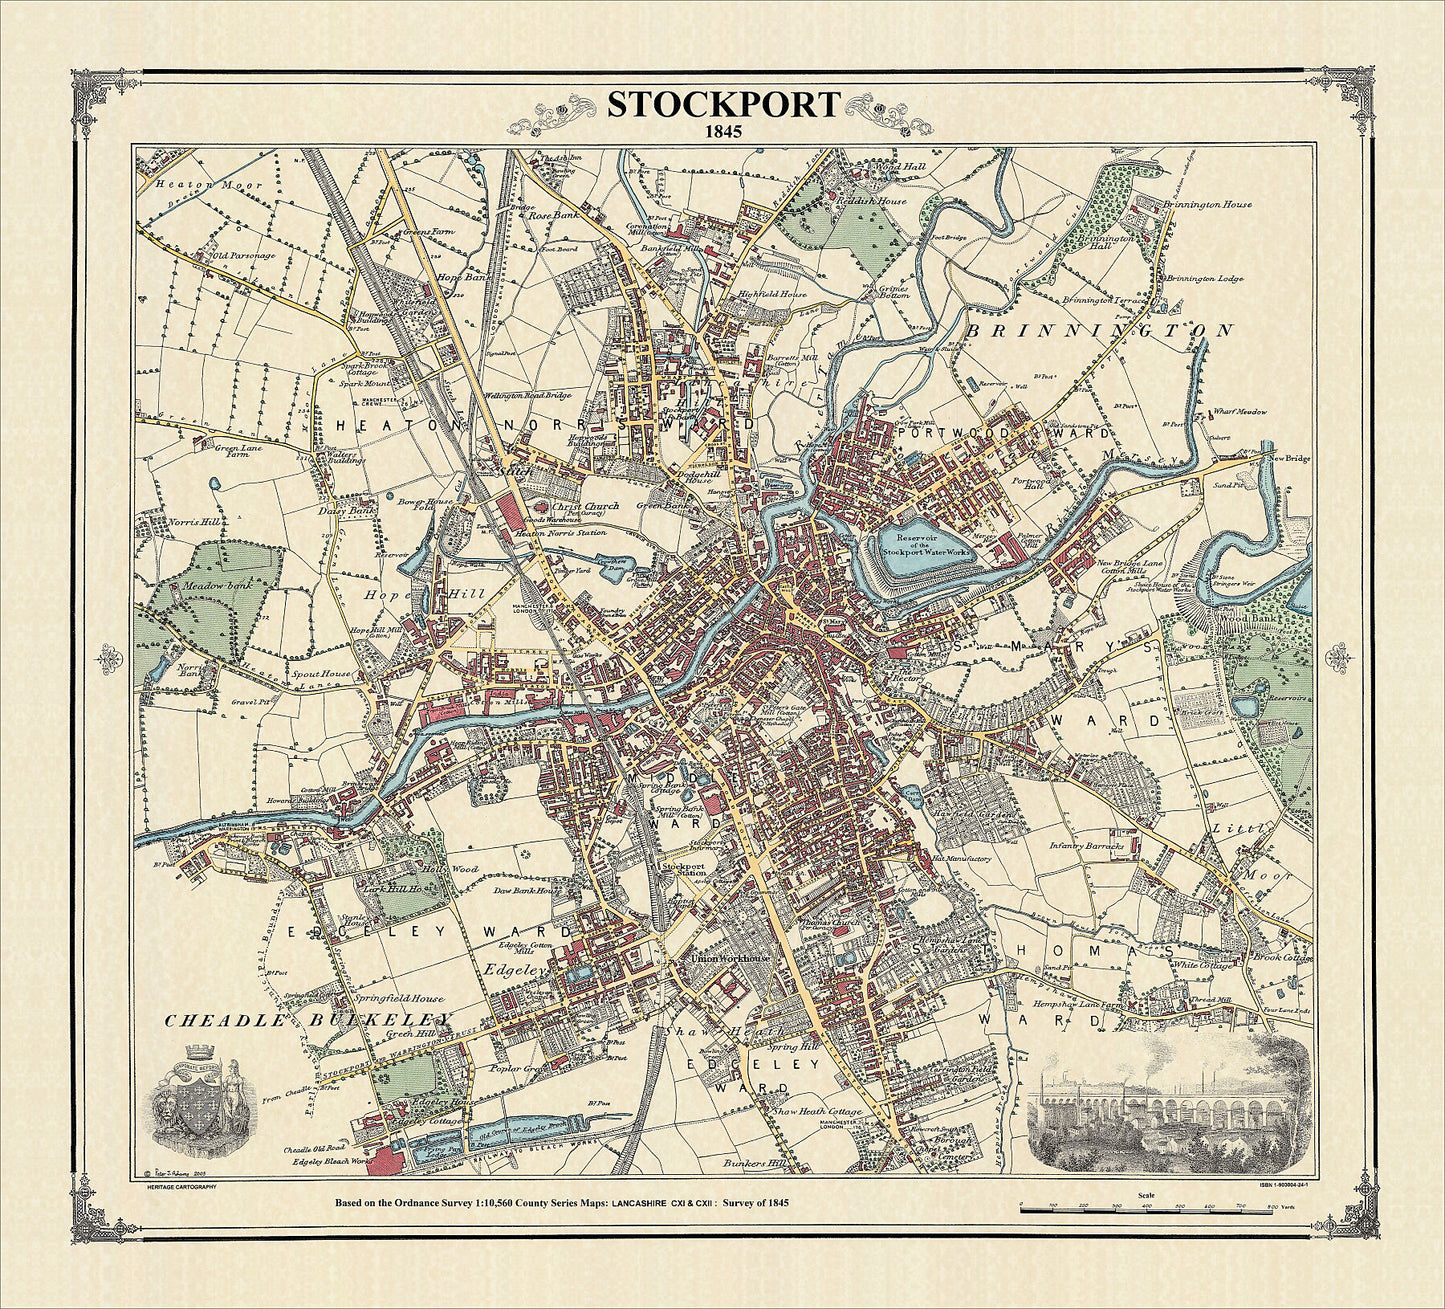 Coloured Victorian map of Stockport in 1845 by Peter J Adams of Heritage Cartography